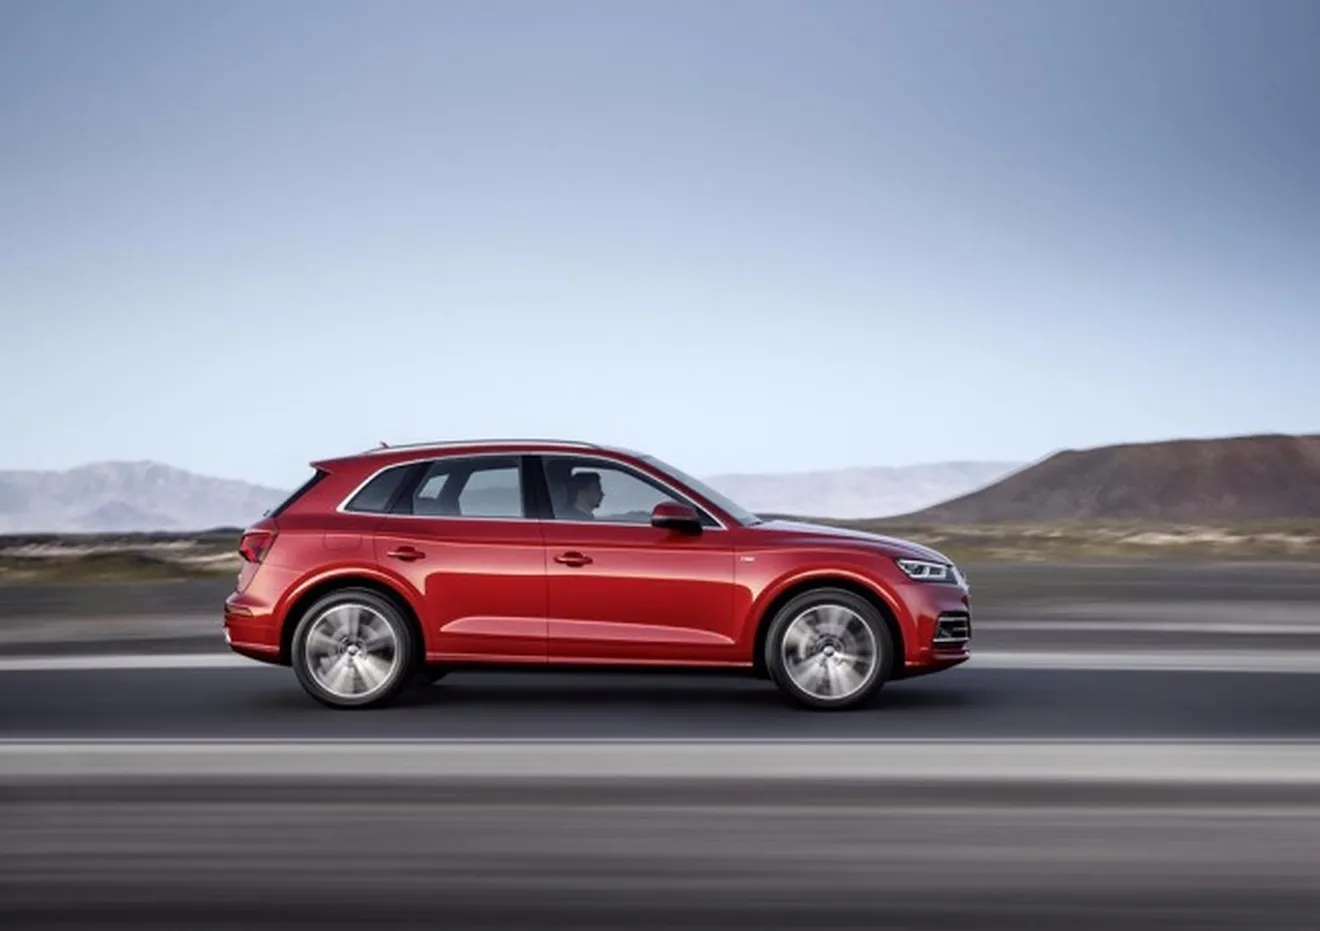 Audi Q5 2017 - lateral